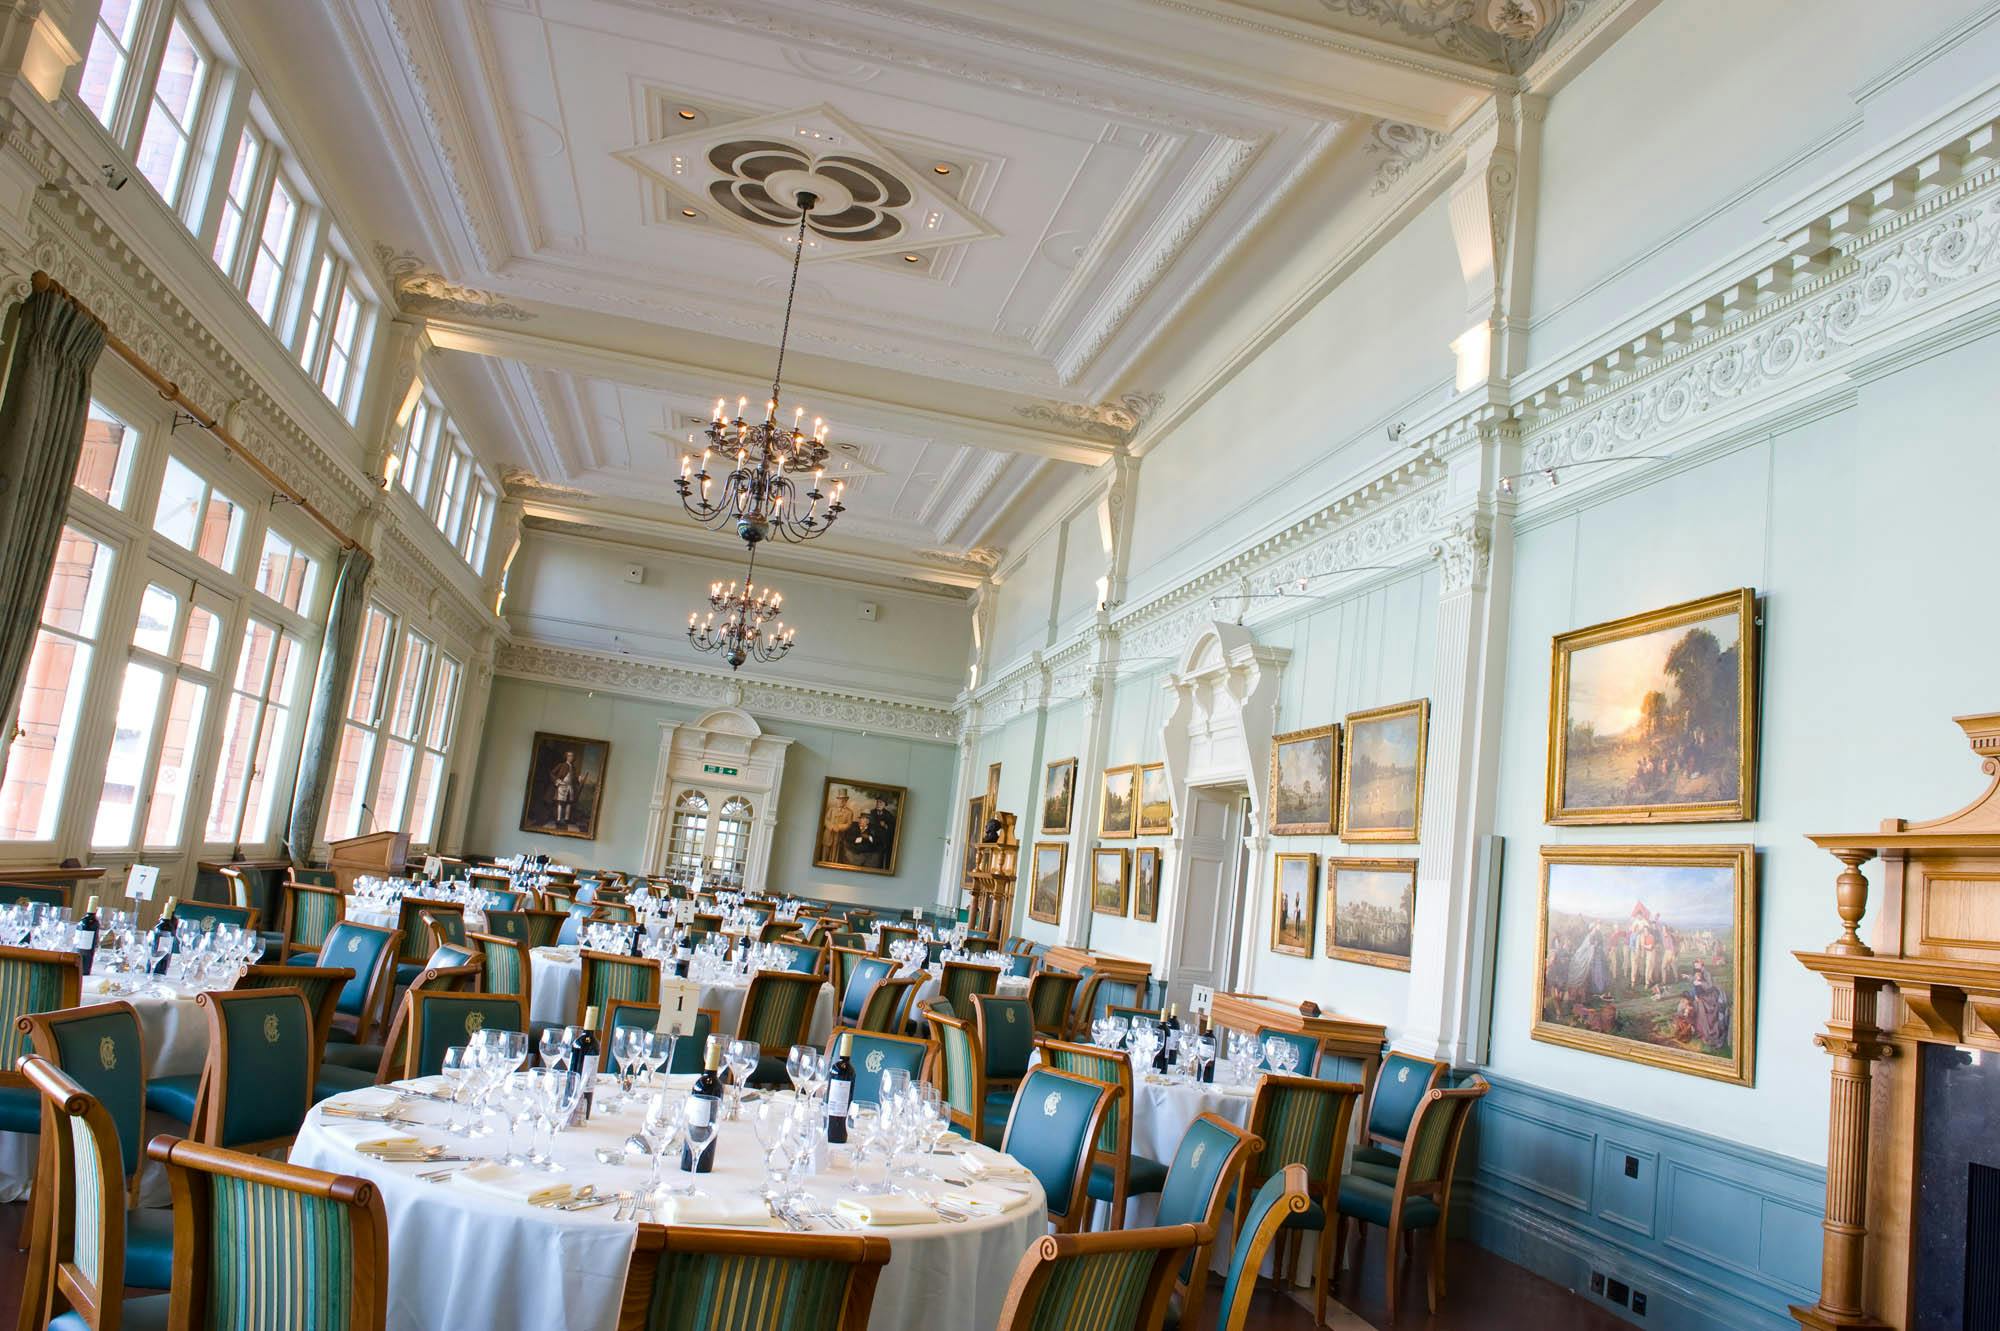 Bar Mitzvah Venues - Lord's Cricket Ground - Events in Long Room - Banner